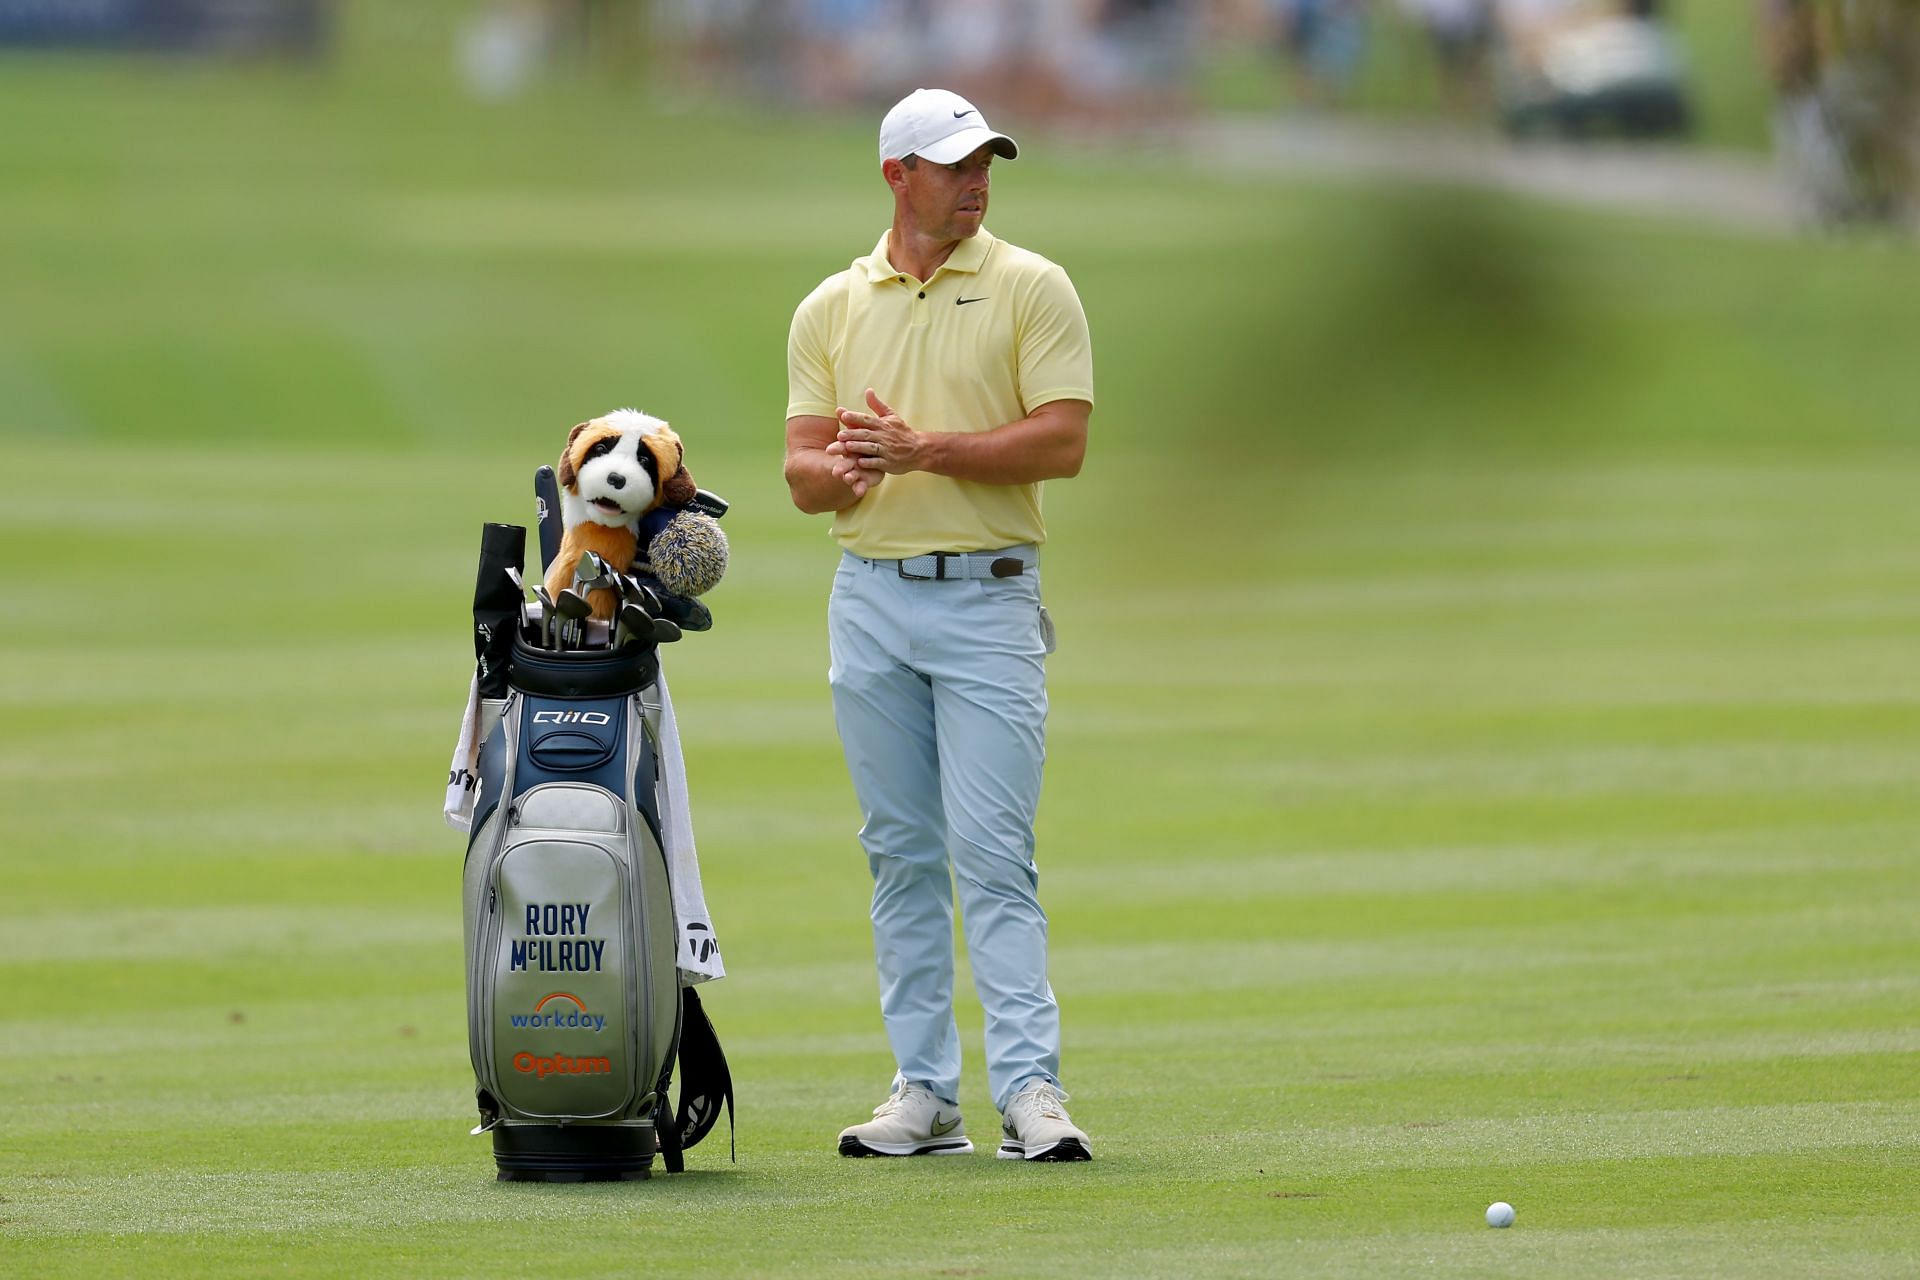 Rory McIlroy is searching for a Masters win